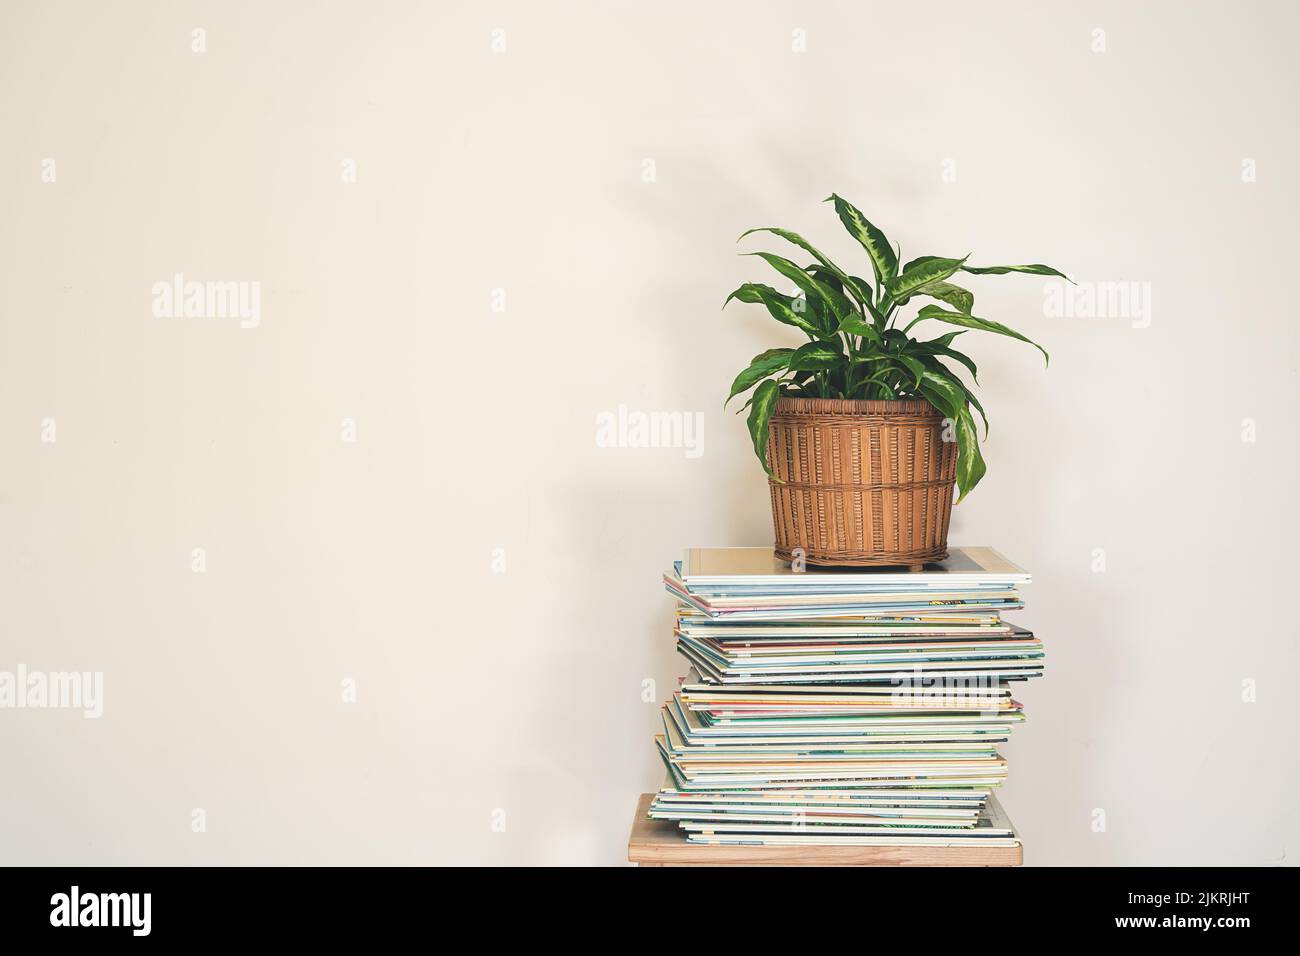 Dieffenbachia or Dumb cane plant in wicker flower pot on a stack of books on a light background, minimalist and scandinavian style, copy space Stock Photo